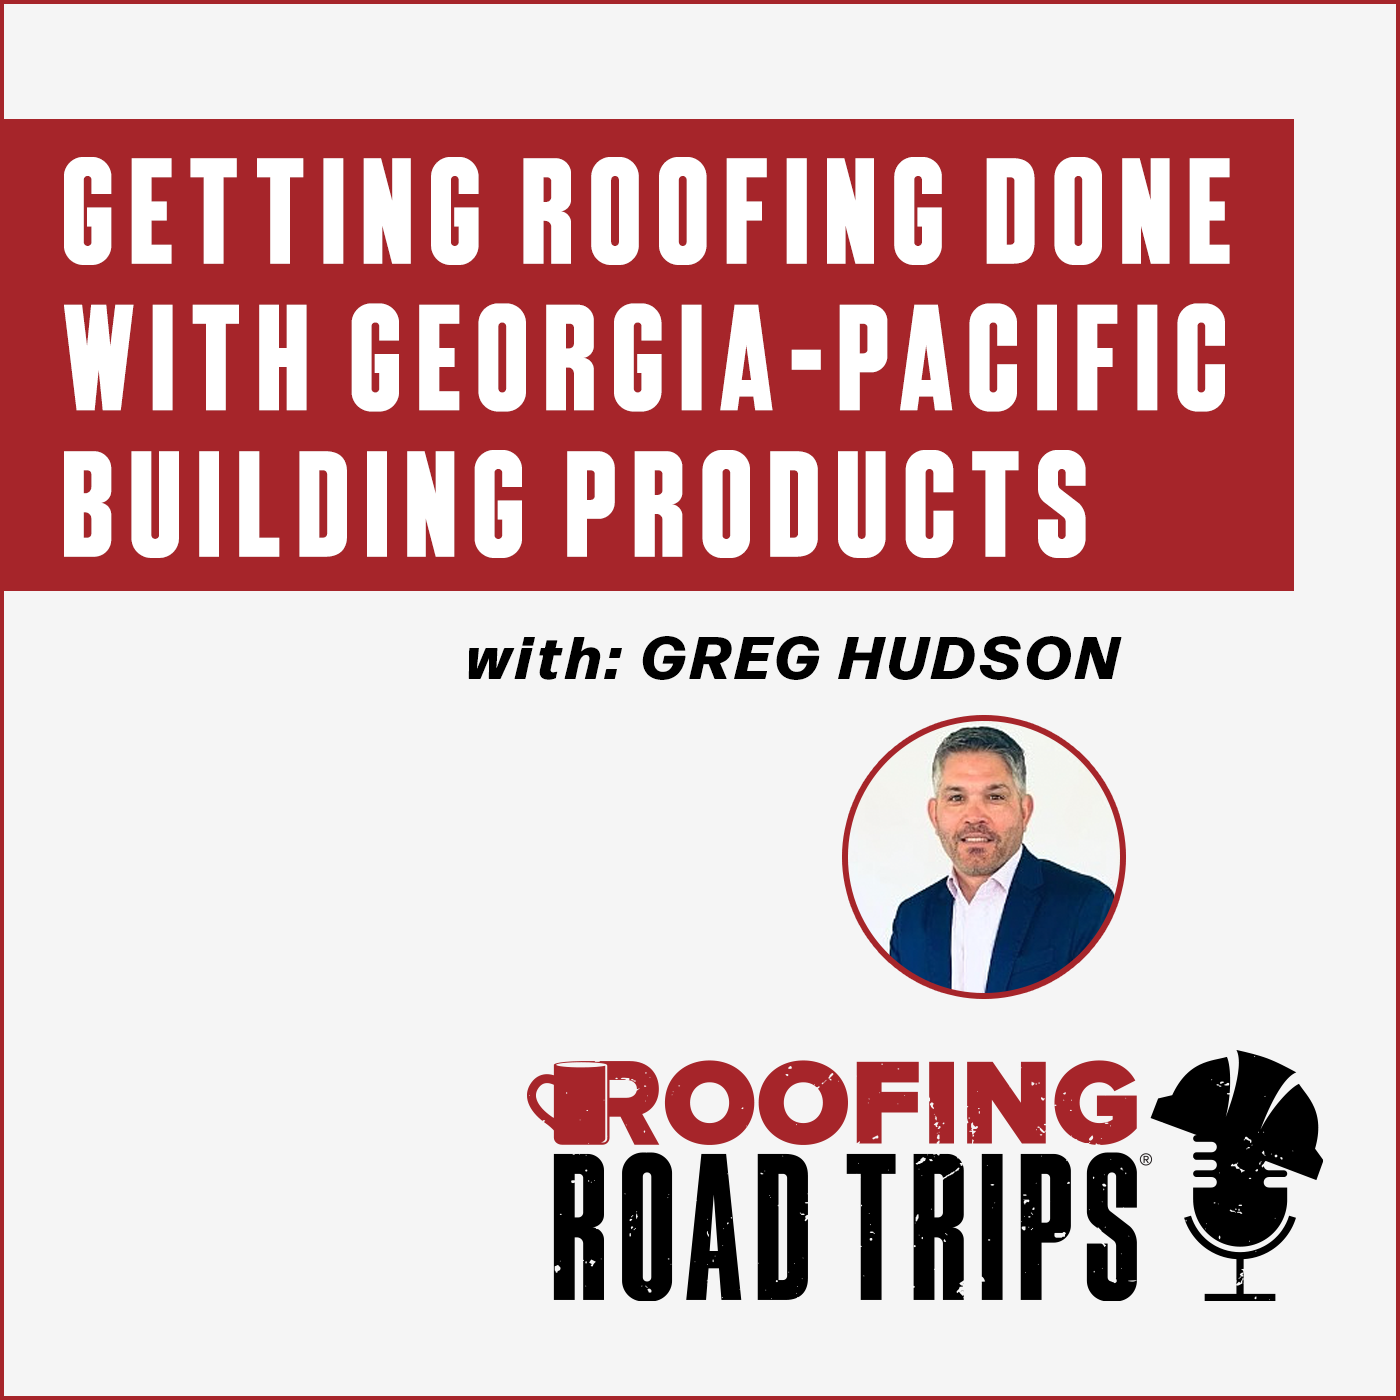 Greg Hudson - Getting Roofing Done with Georgia-Pacific Building Products